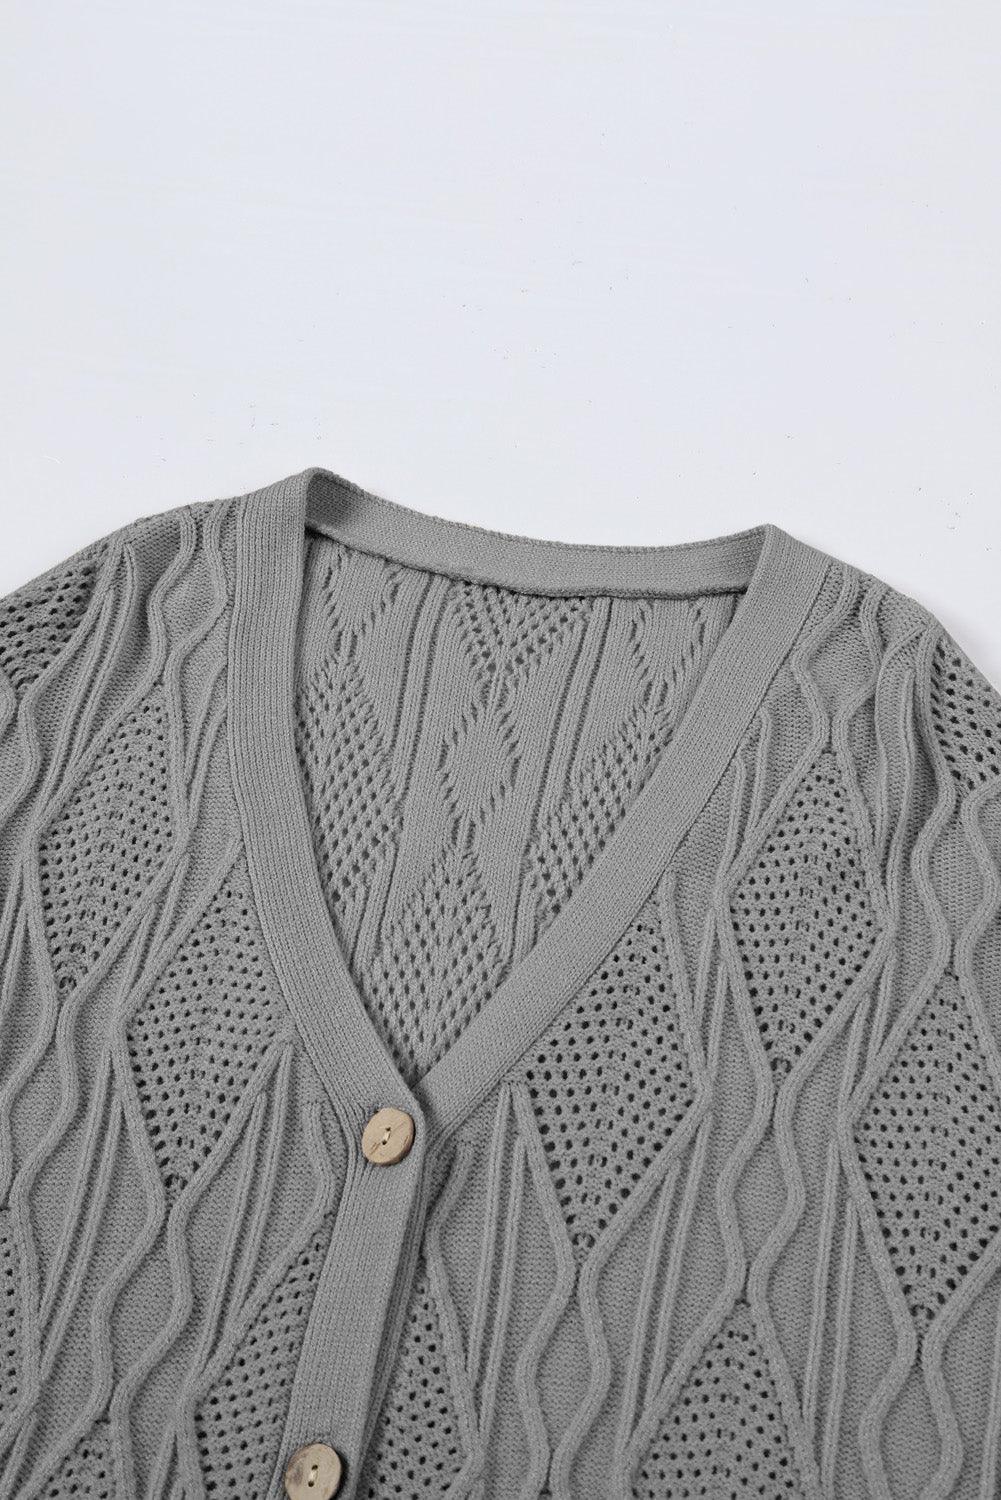 Apricot Plus Size Knitted Hollow out Button up Cardigan - L & M Kee, LLC